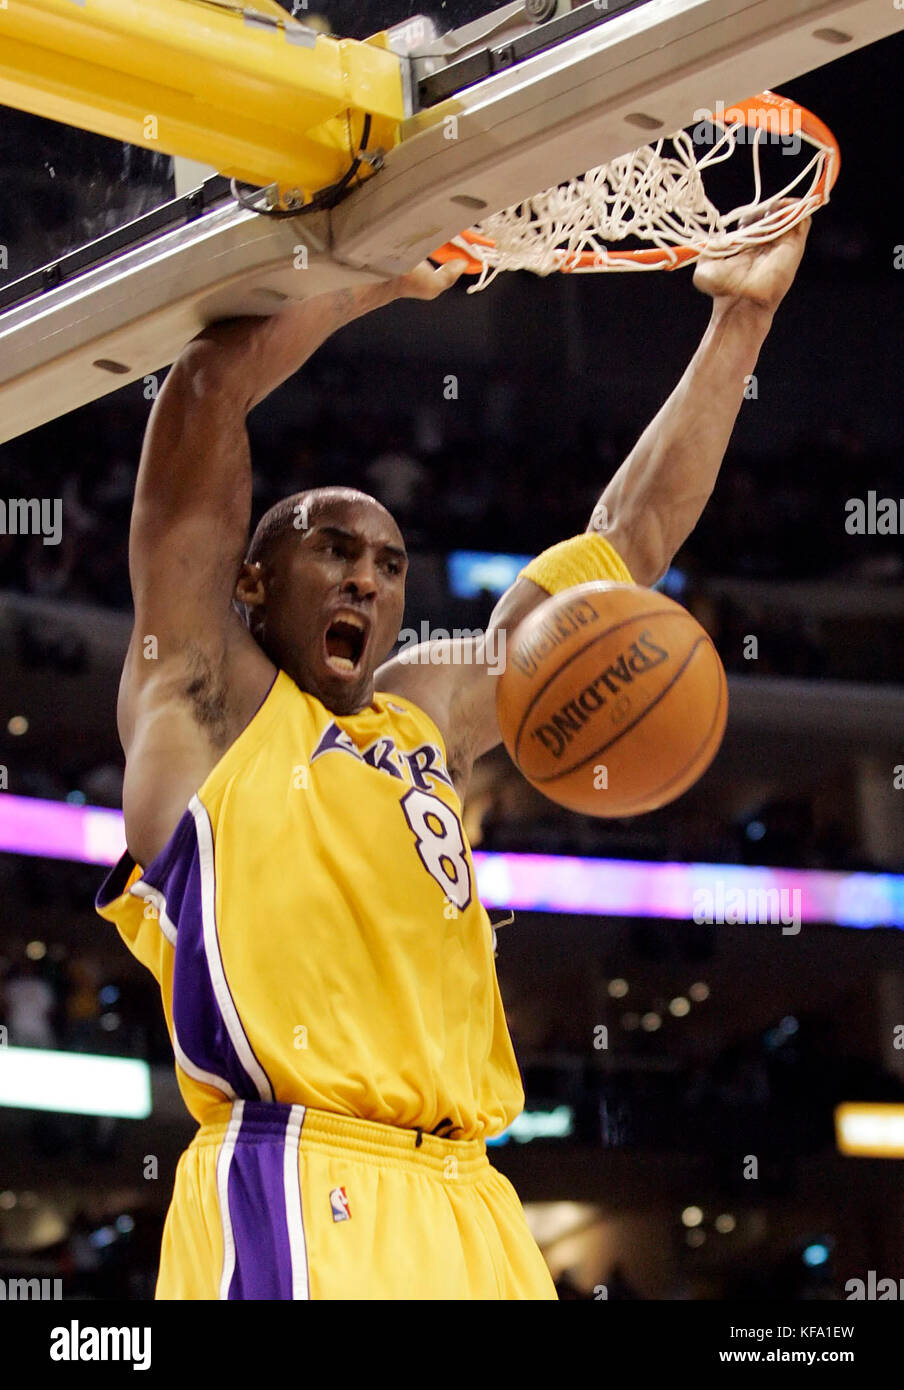 Los Angeles Lakers' Kobe Bryant dunks the ball against the Seattle SuperSonics in the third quarter in Los Angeles on Thursday, Nov. 24, 2005.  Photo by Francis Specker Stock Photo